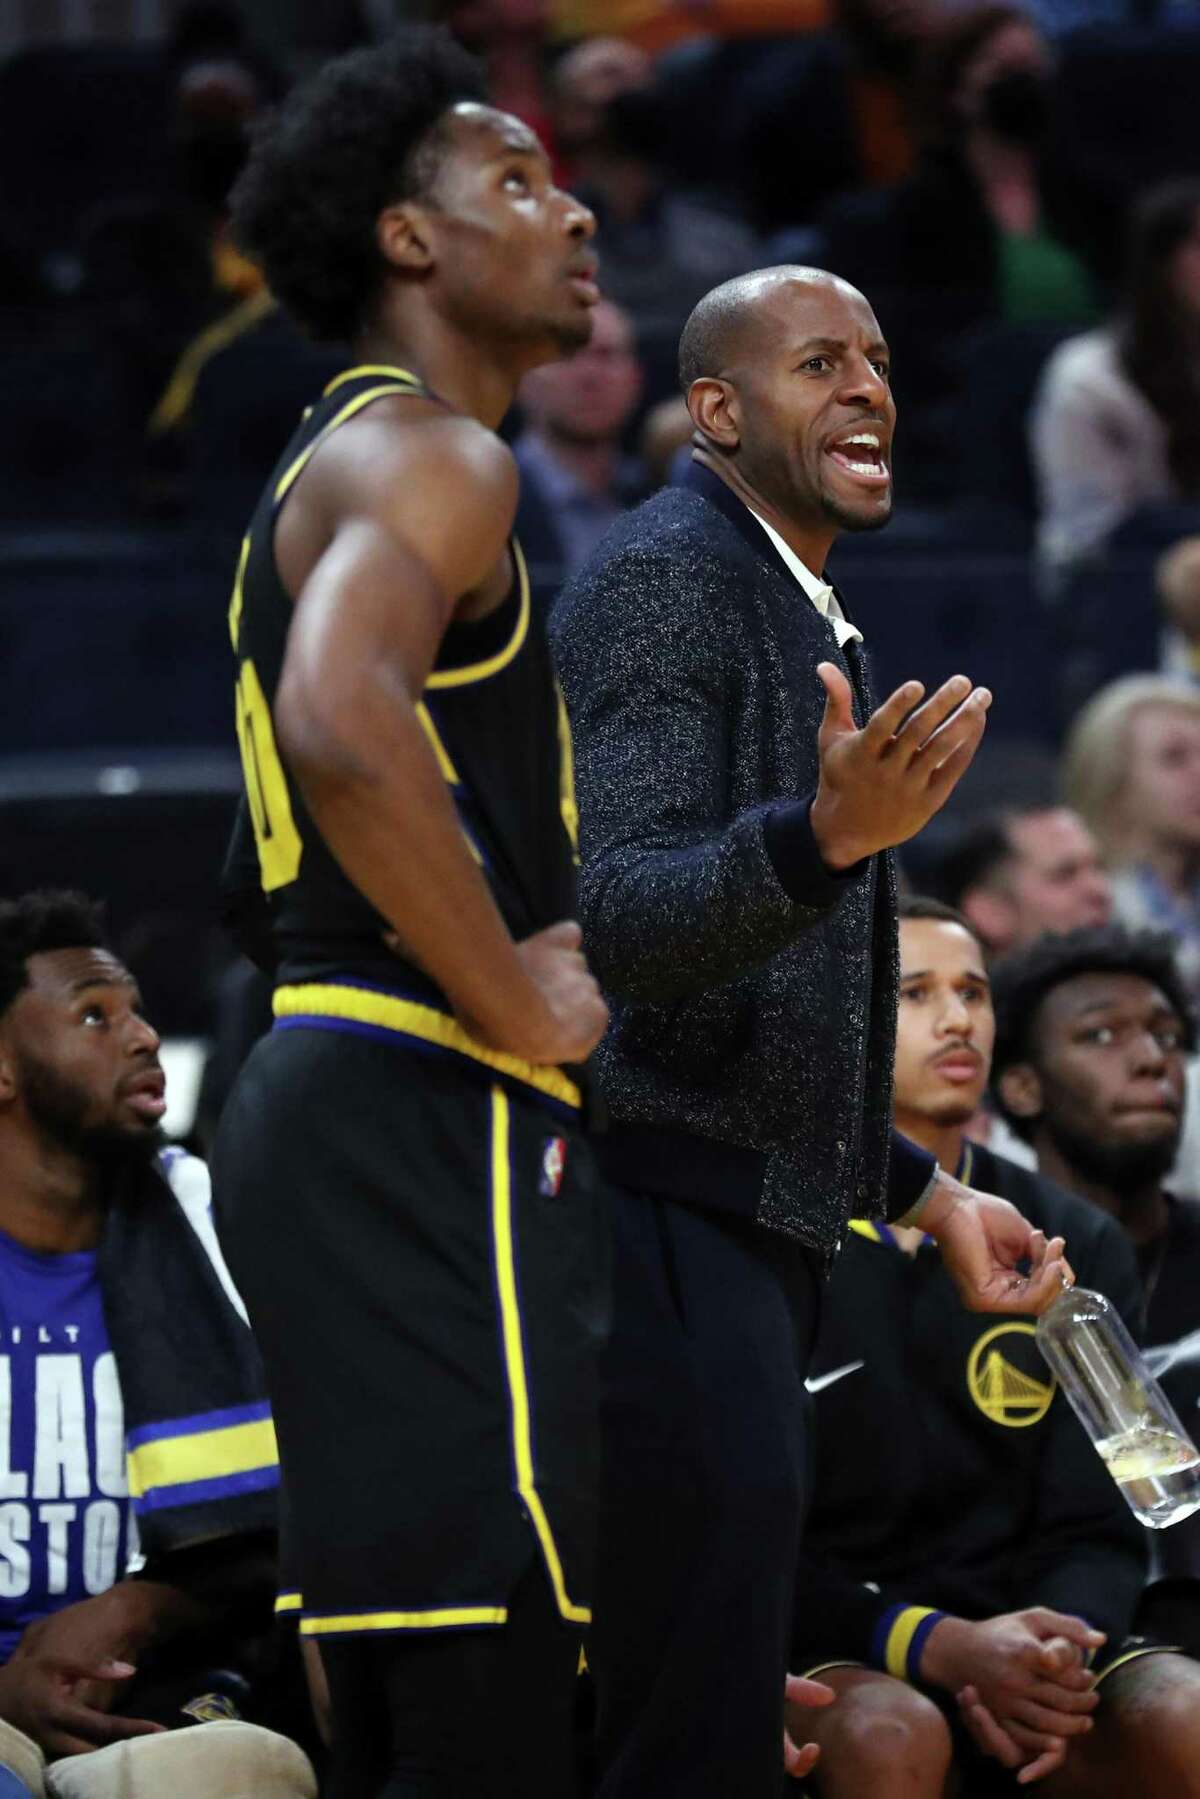 Golden State Warriors' Andre Iguodala reacts to a goaltending call and technical foul on Jonathan Kuminga in 4th quarter during Dallas Mavericks' 107-101 win in NBA game at Chase Center in San Francisco, Calif., on Sunday, February 27, 2022.